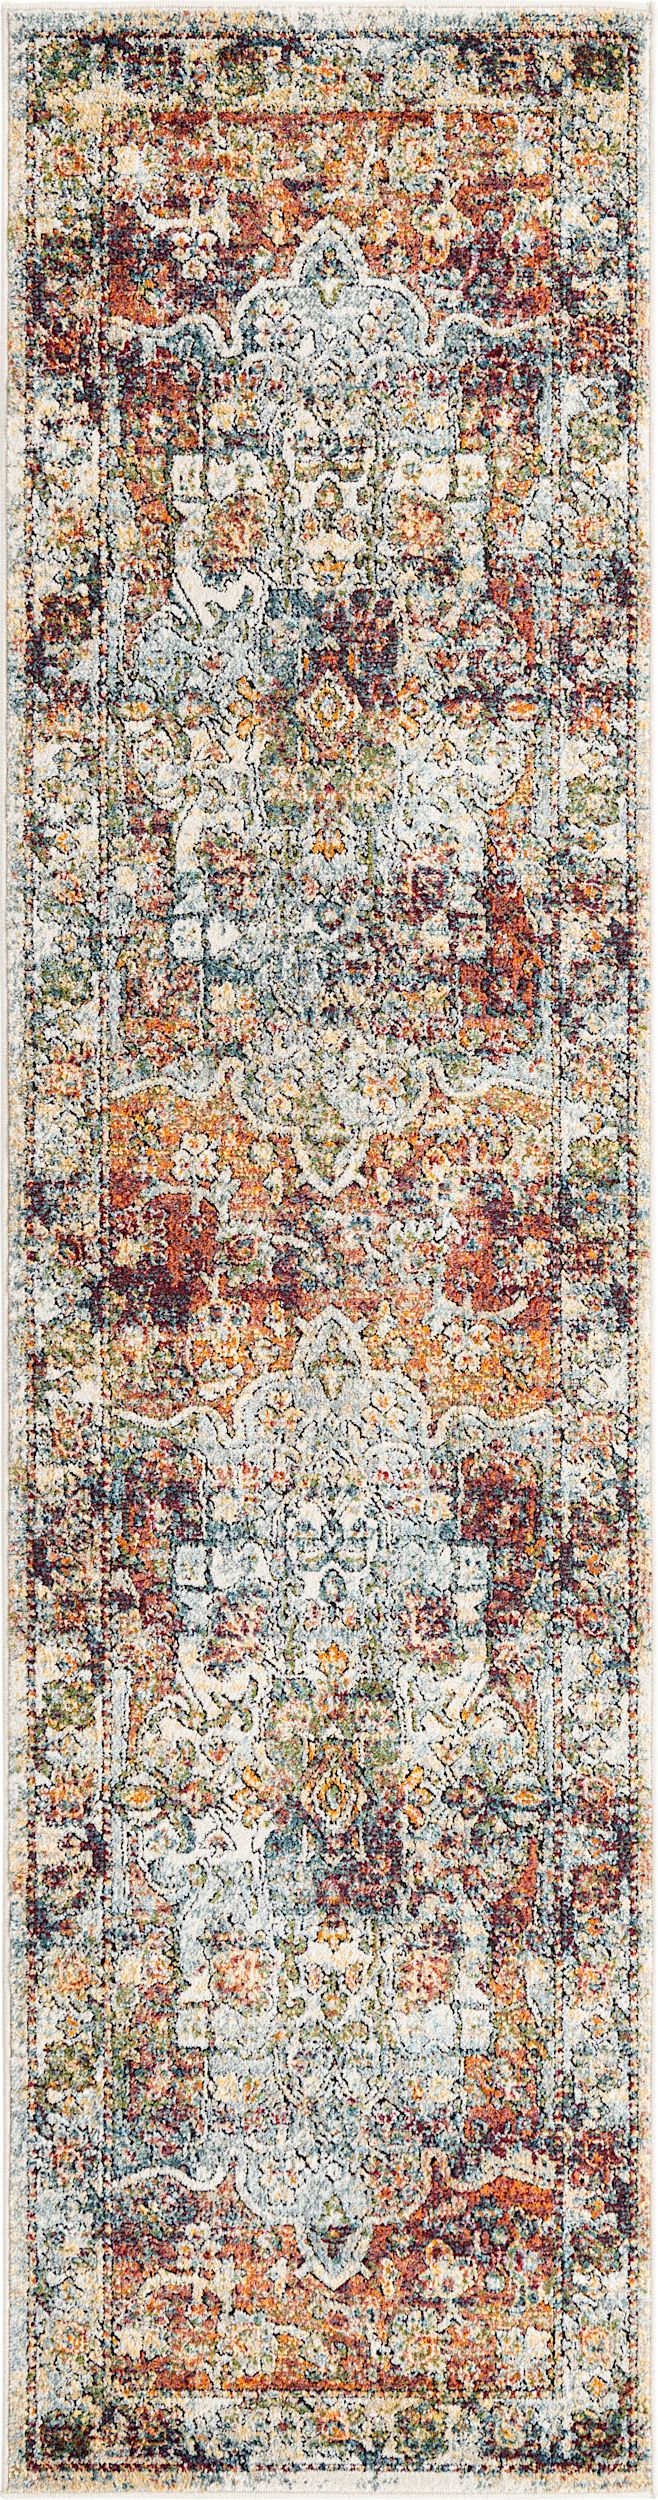 rugpal charian traditional area rug collection